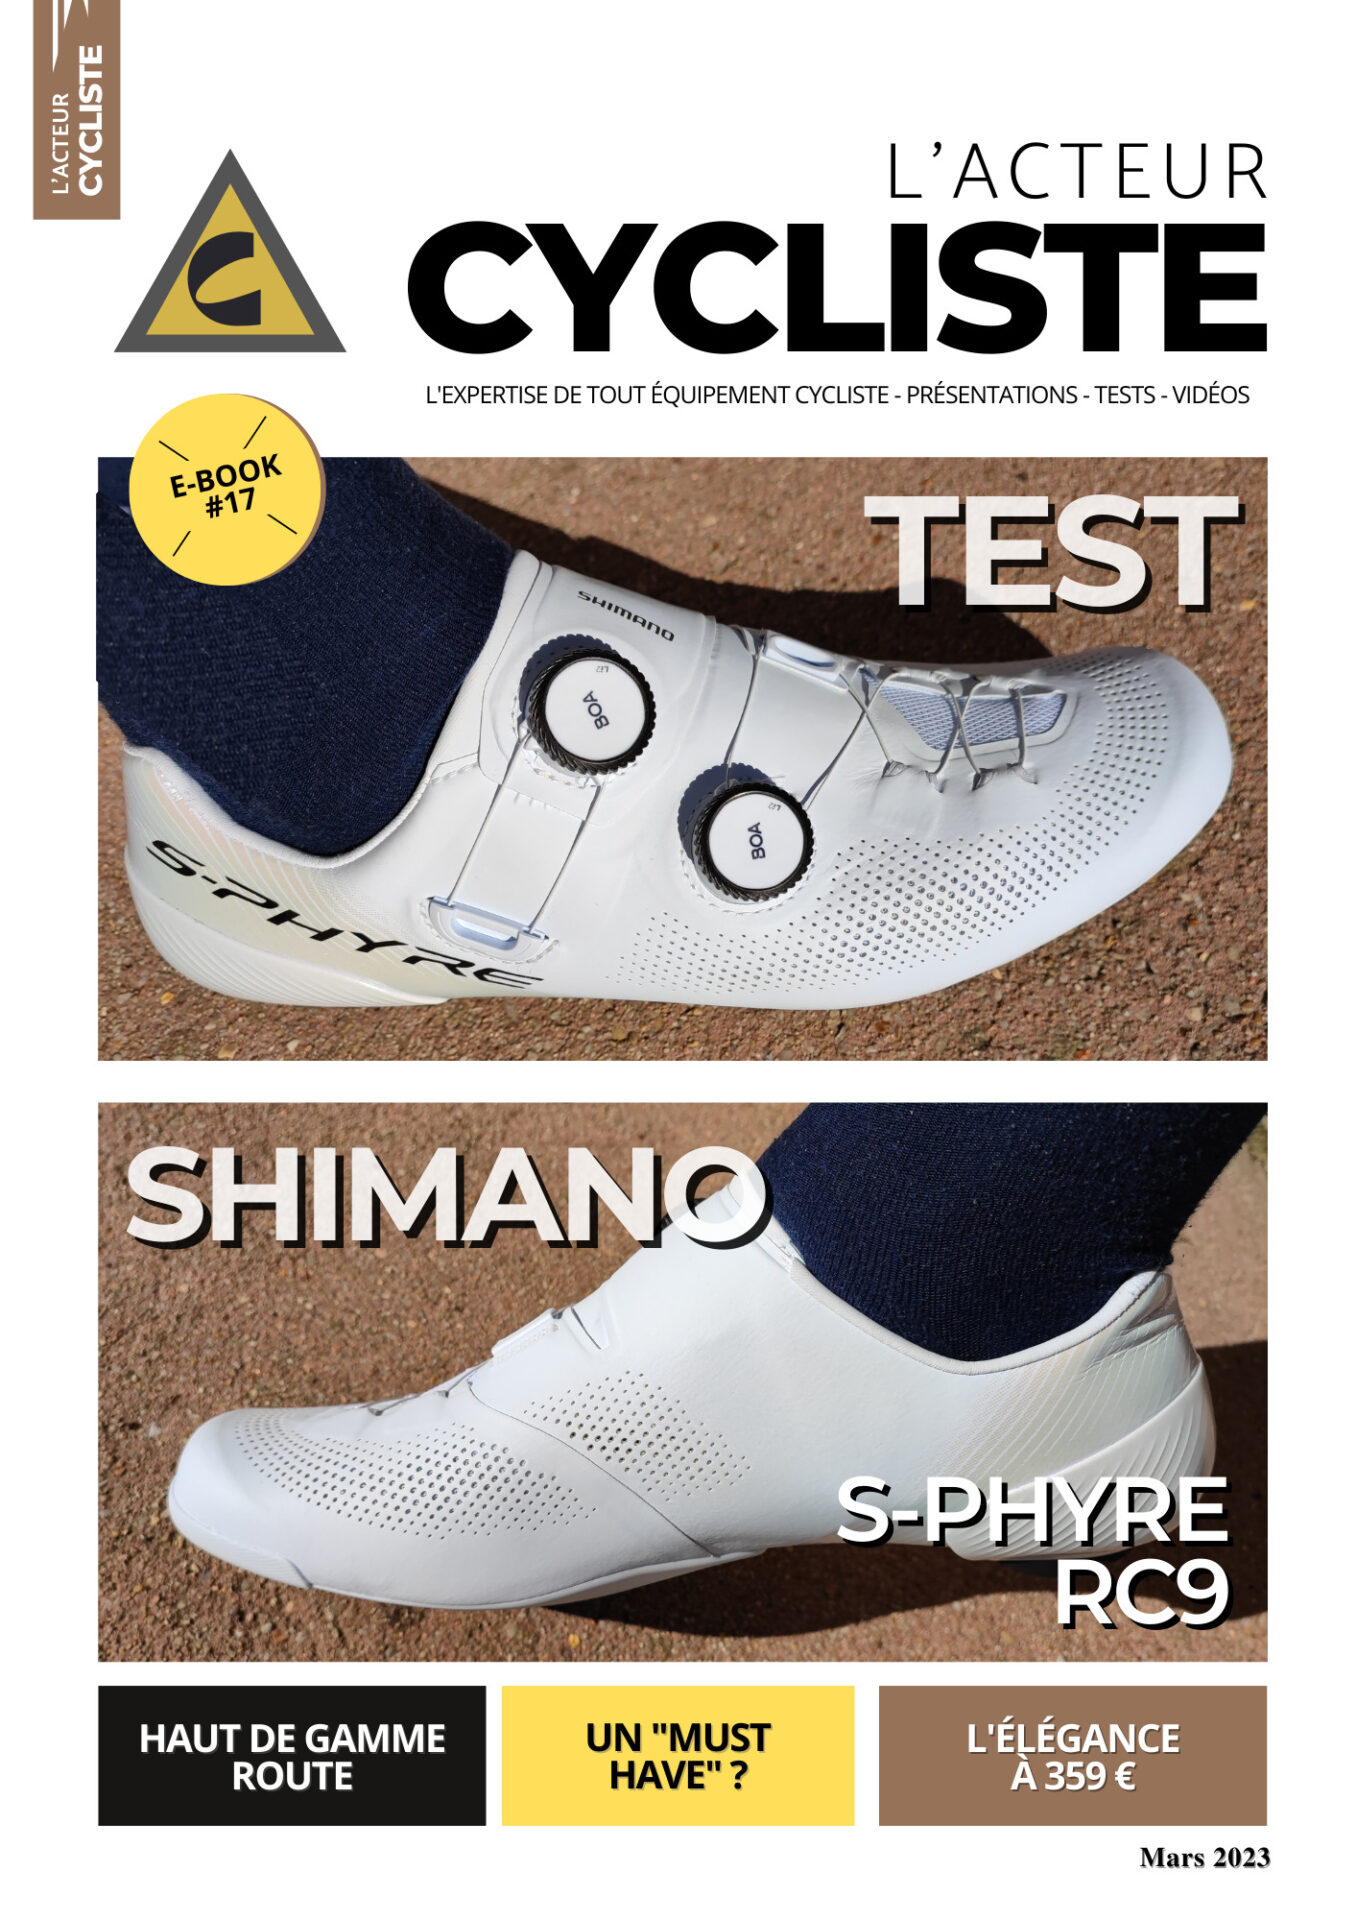 E-BOOK N°17 TEST CHAUSSURES SHIMANO S-PHYRE RC903